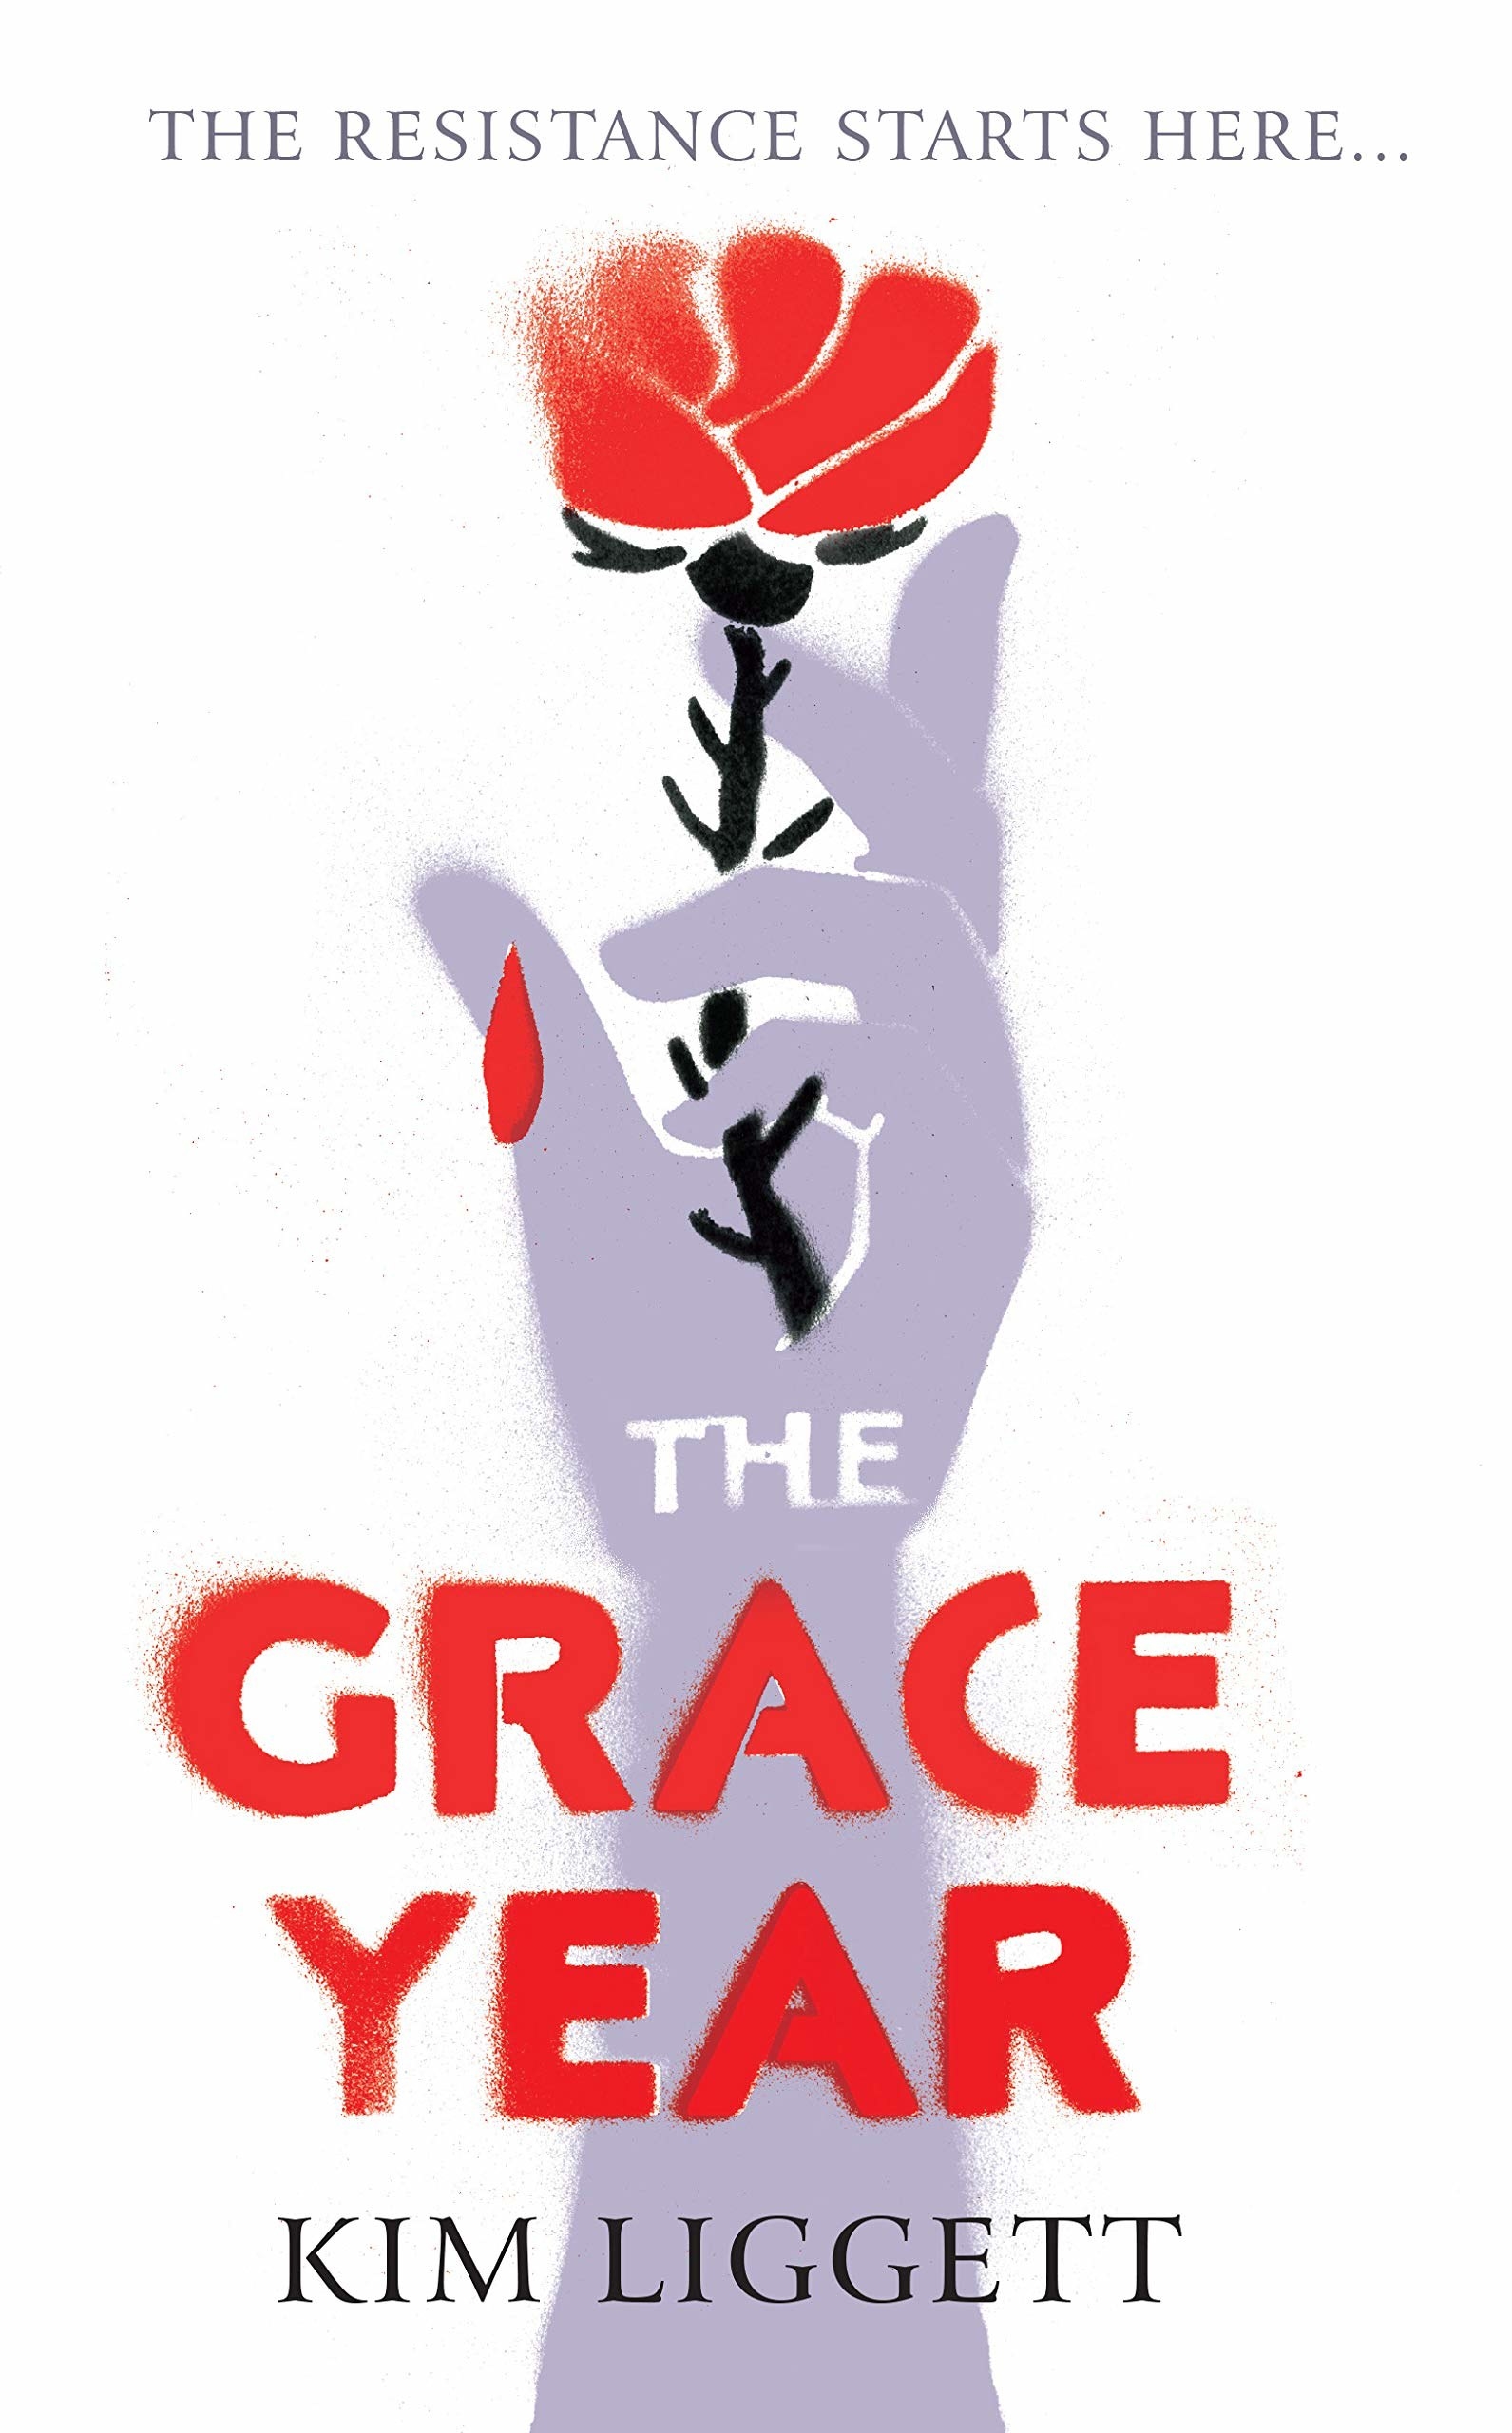 A white book cover, with a purple shadow of a hand and arm holding a red rose. There is a droplet of blood coming fron the thumb, and in red letters it says the title.